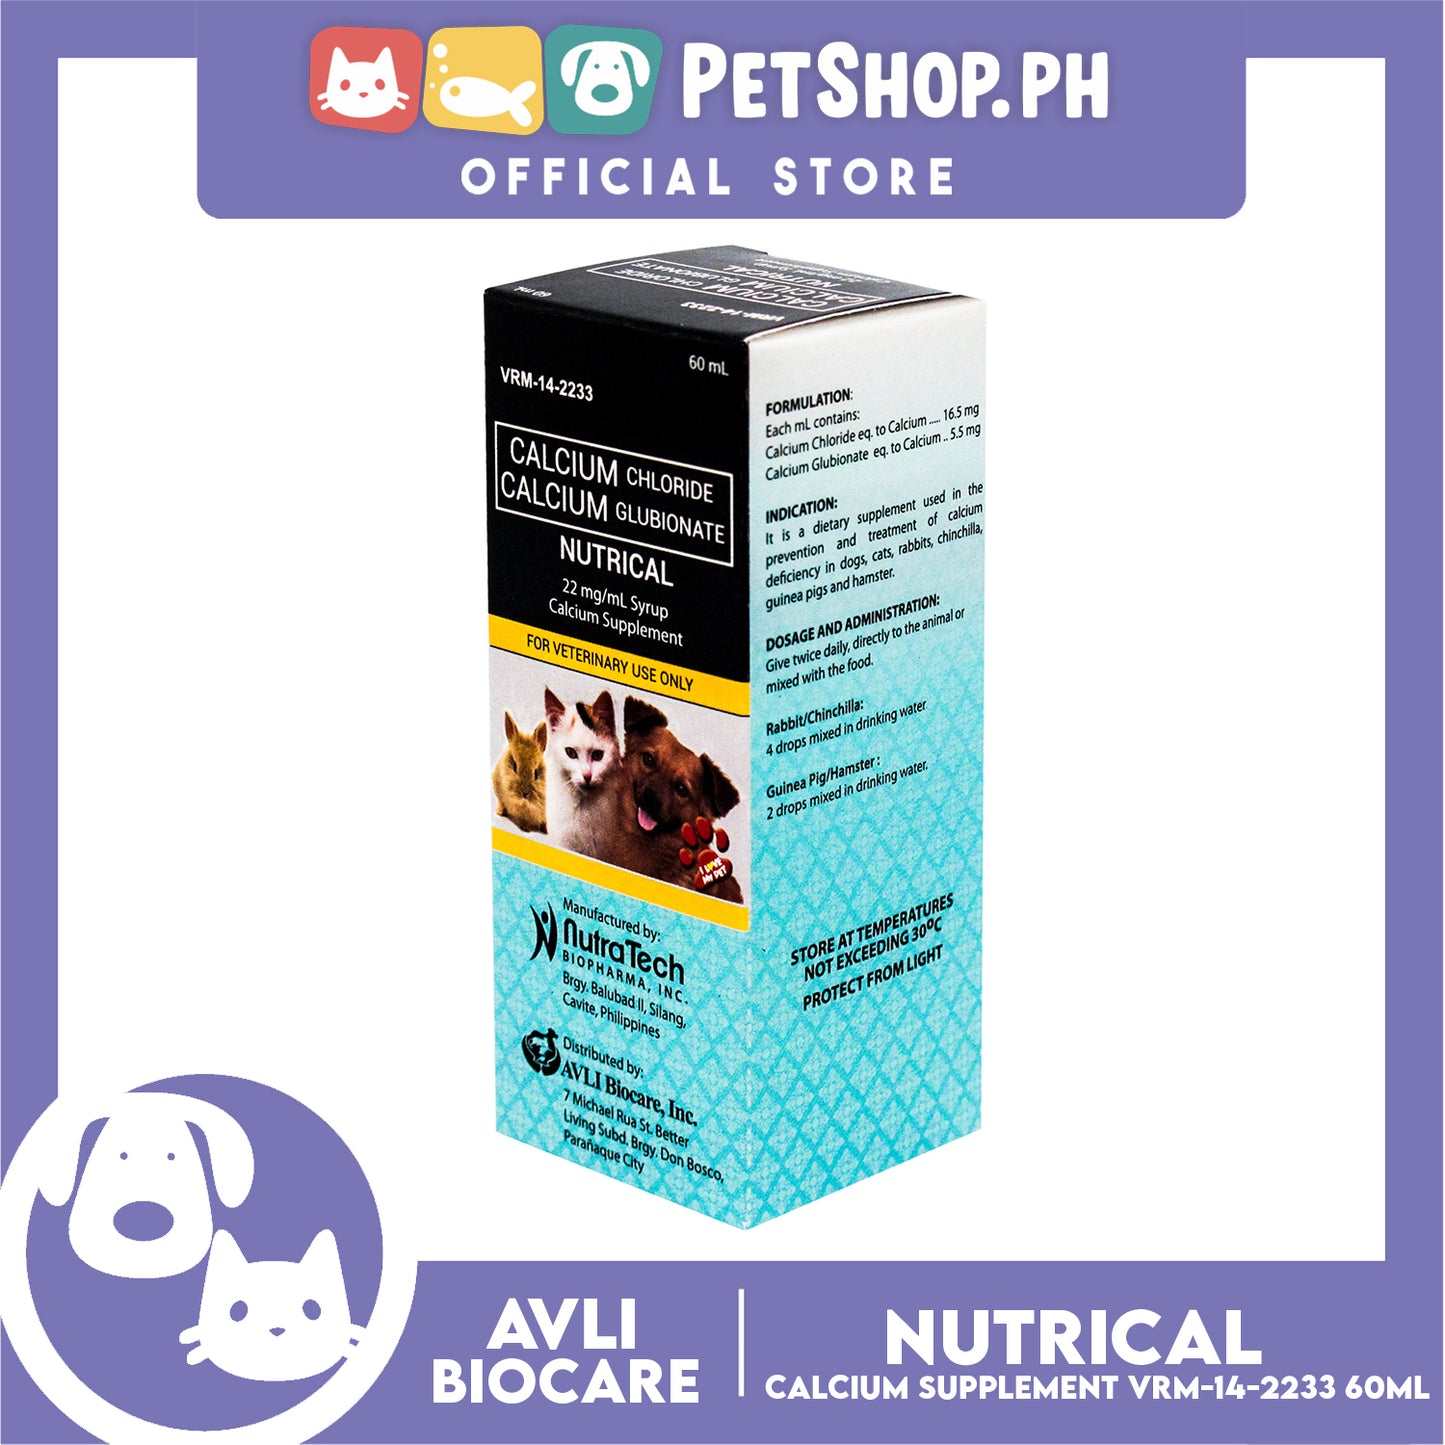 Nutrical Calcium Supplement VRM-14-2233 60ml for Pets Dietary Supplement